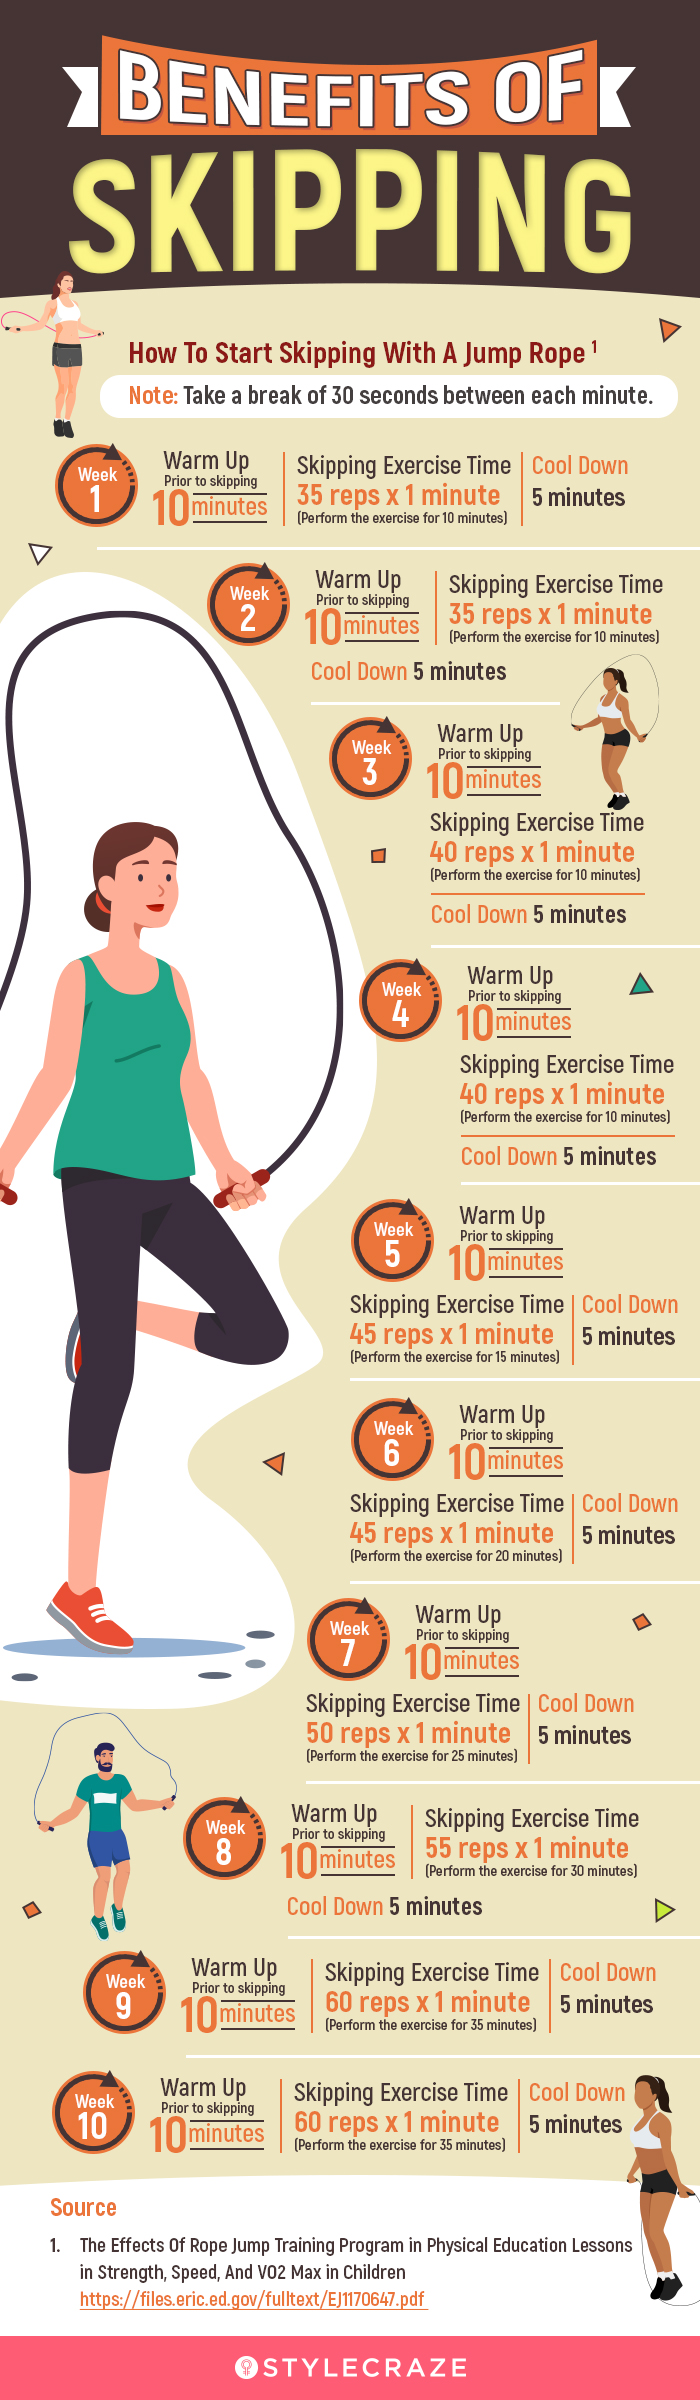 benefits of skipping (infographic)